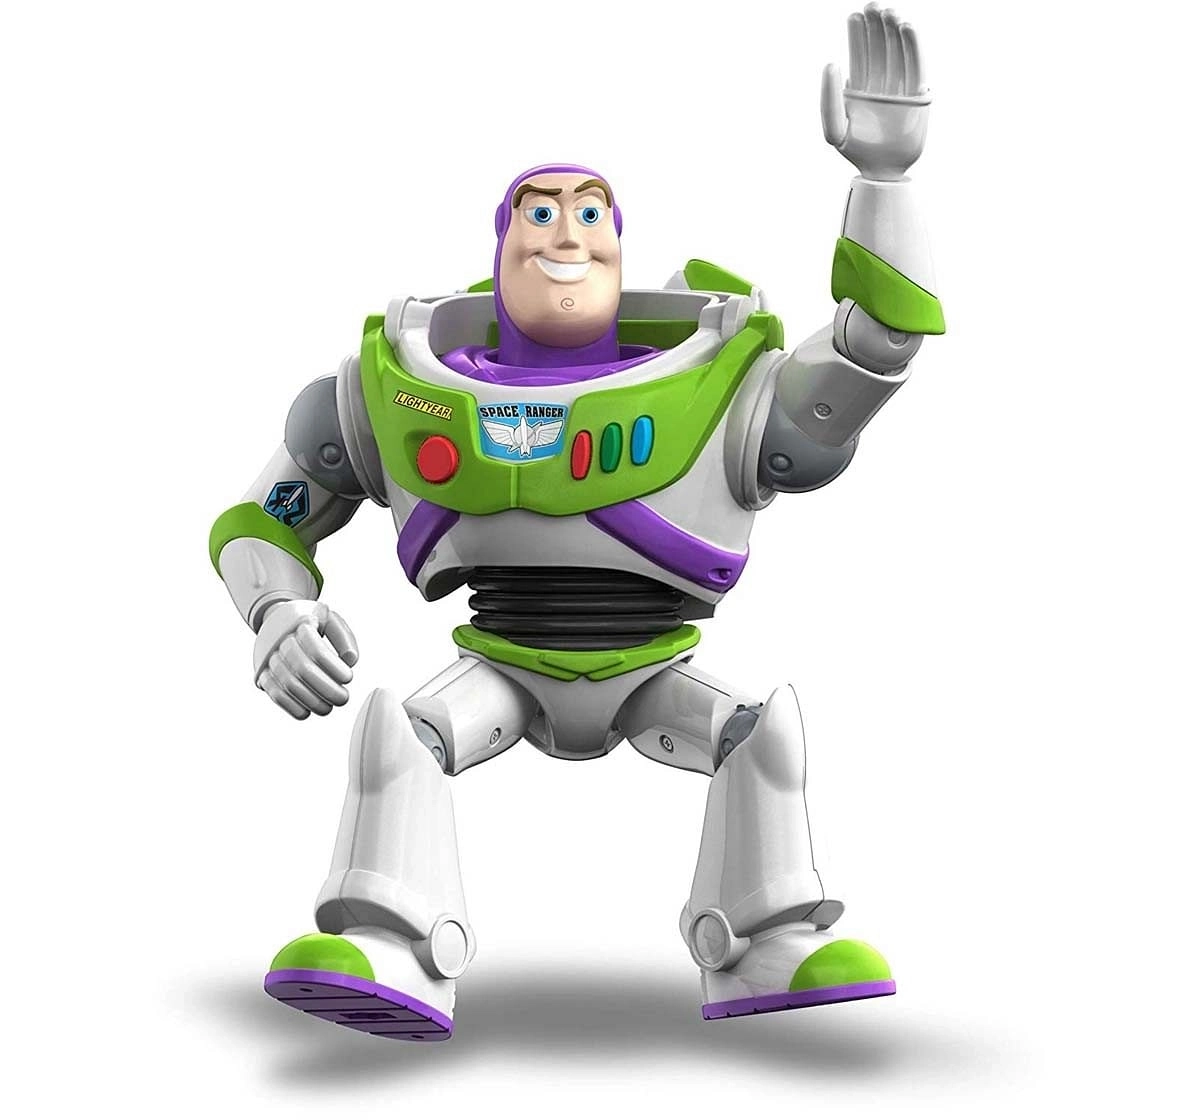 Toy Story Buzz Lightyear Action Figures for Kids age 3Y+ 